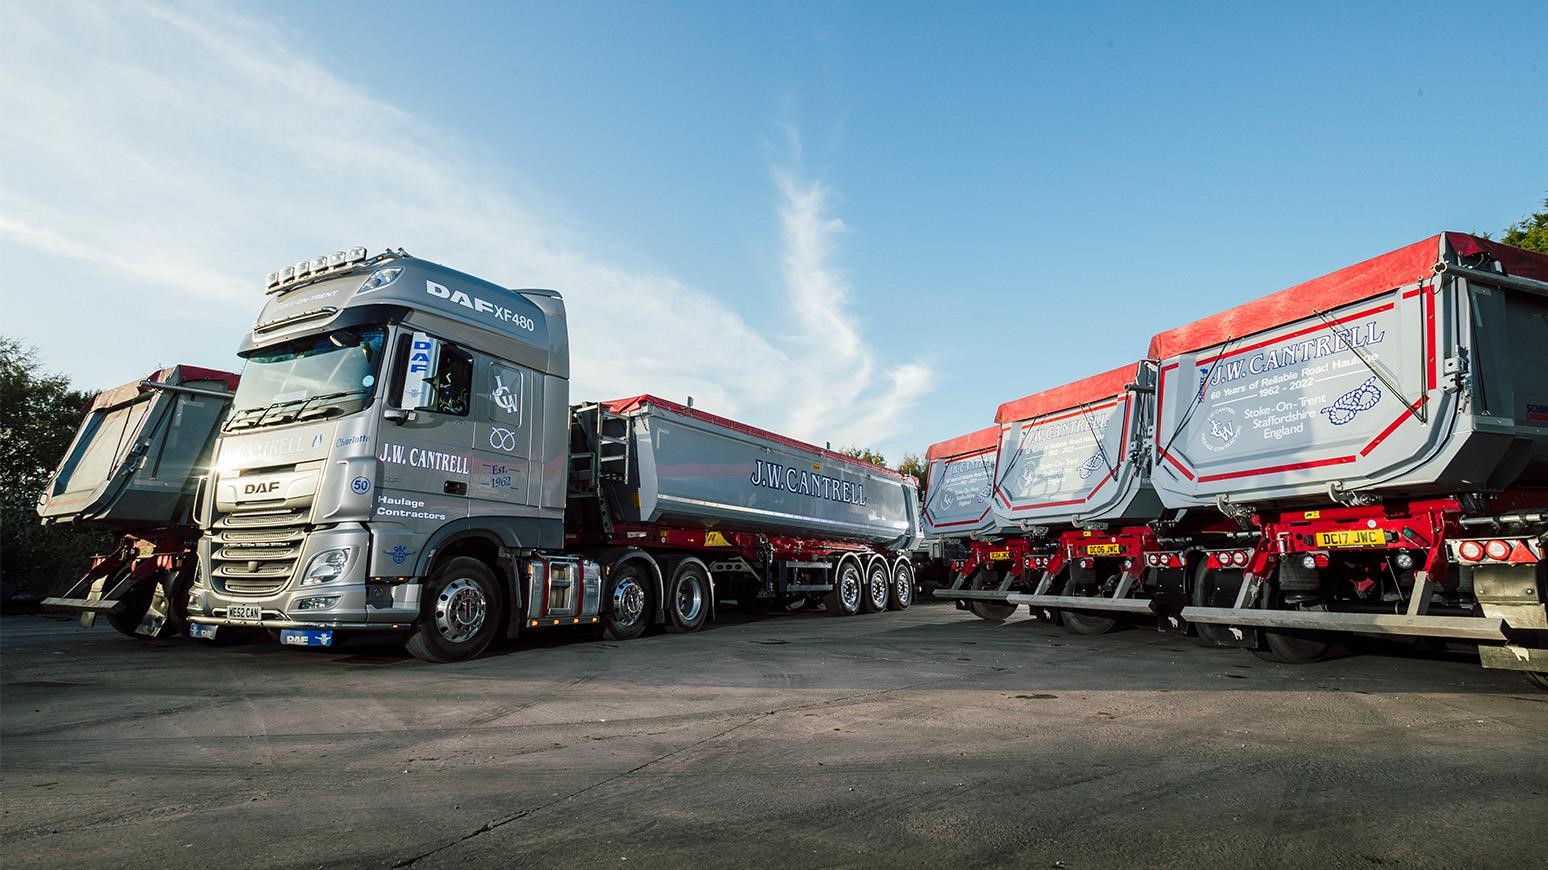 J W Cantrell Haulage Contractors’ Trial Of Schmitz Cargobull Trailer Gives Way To Larger Commitment